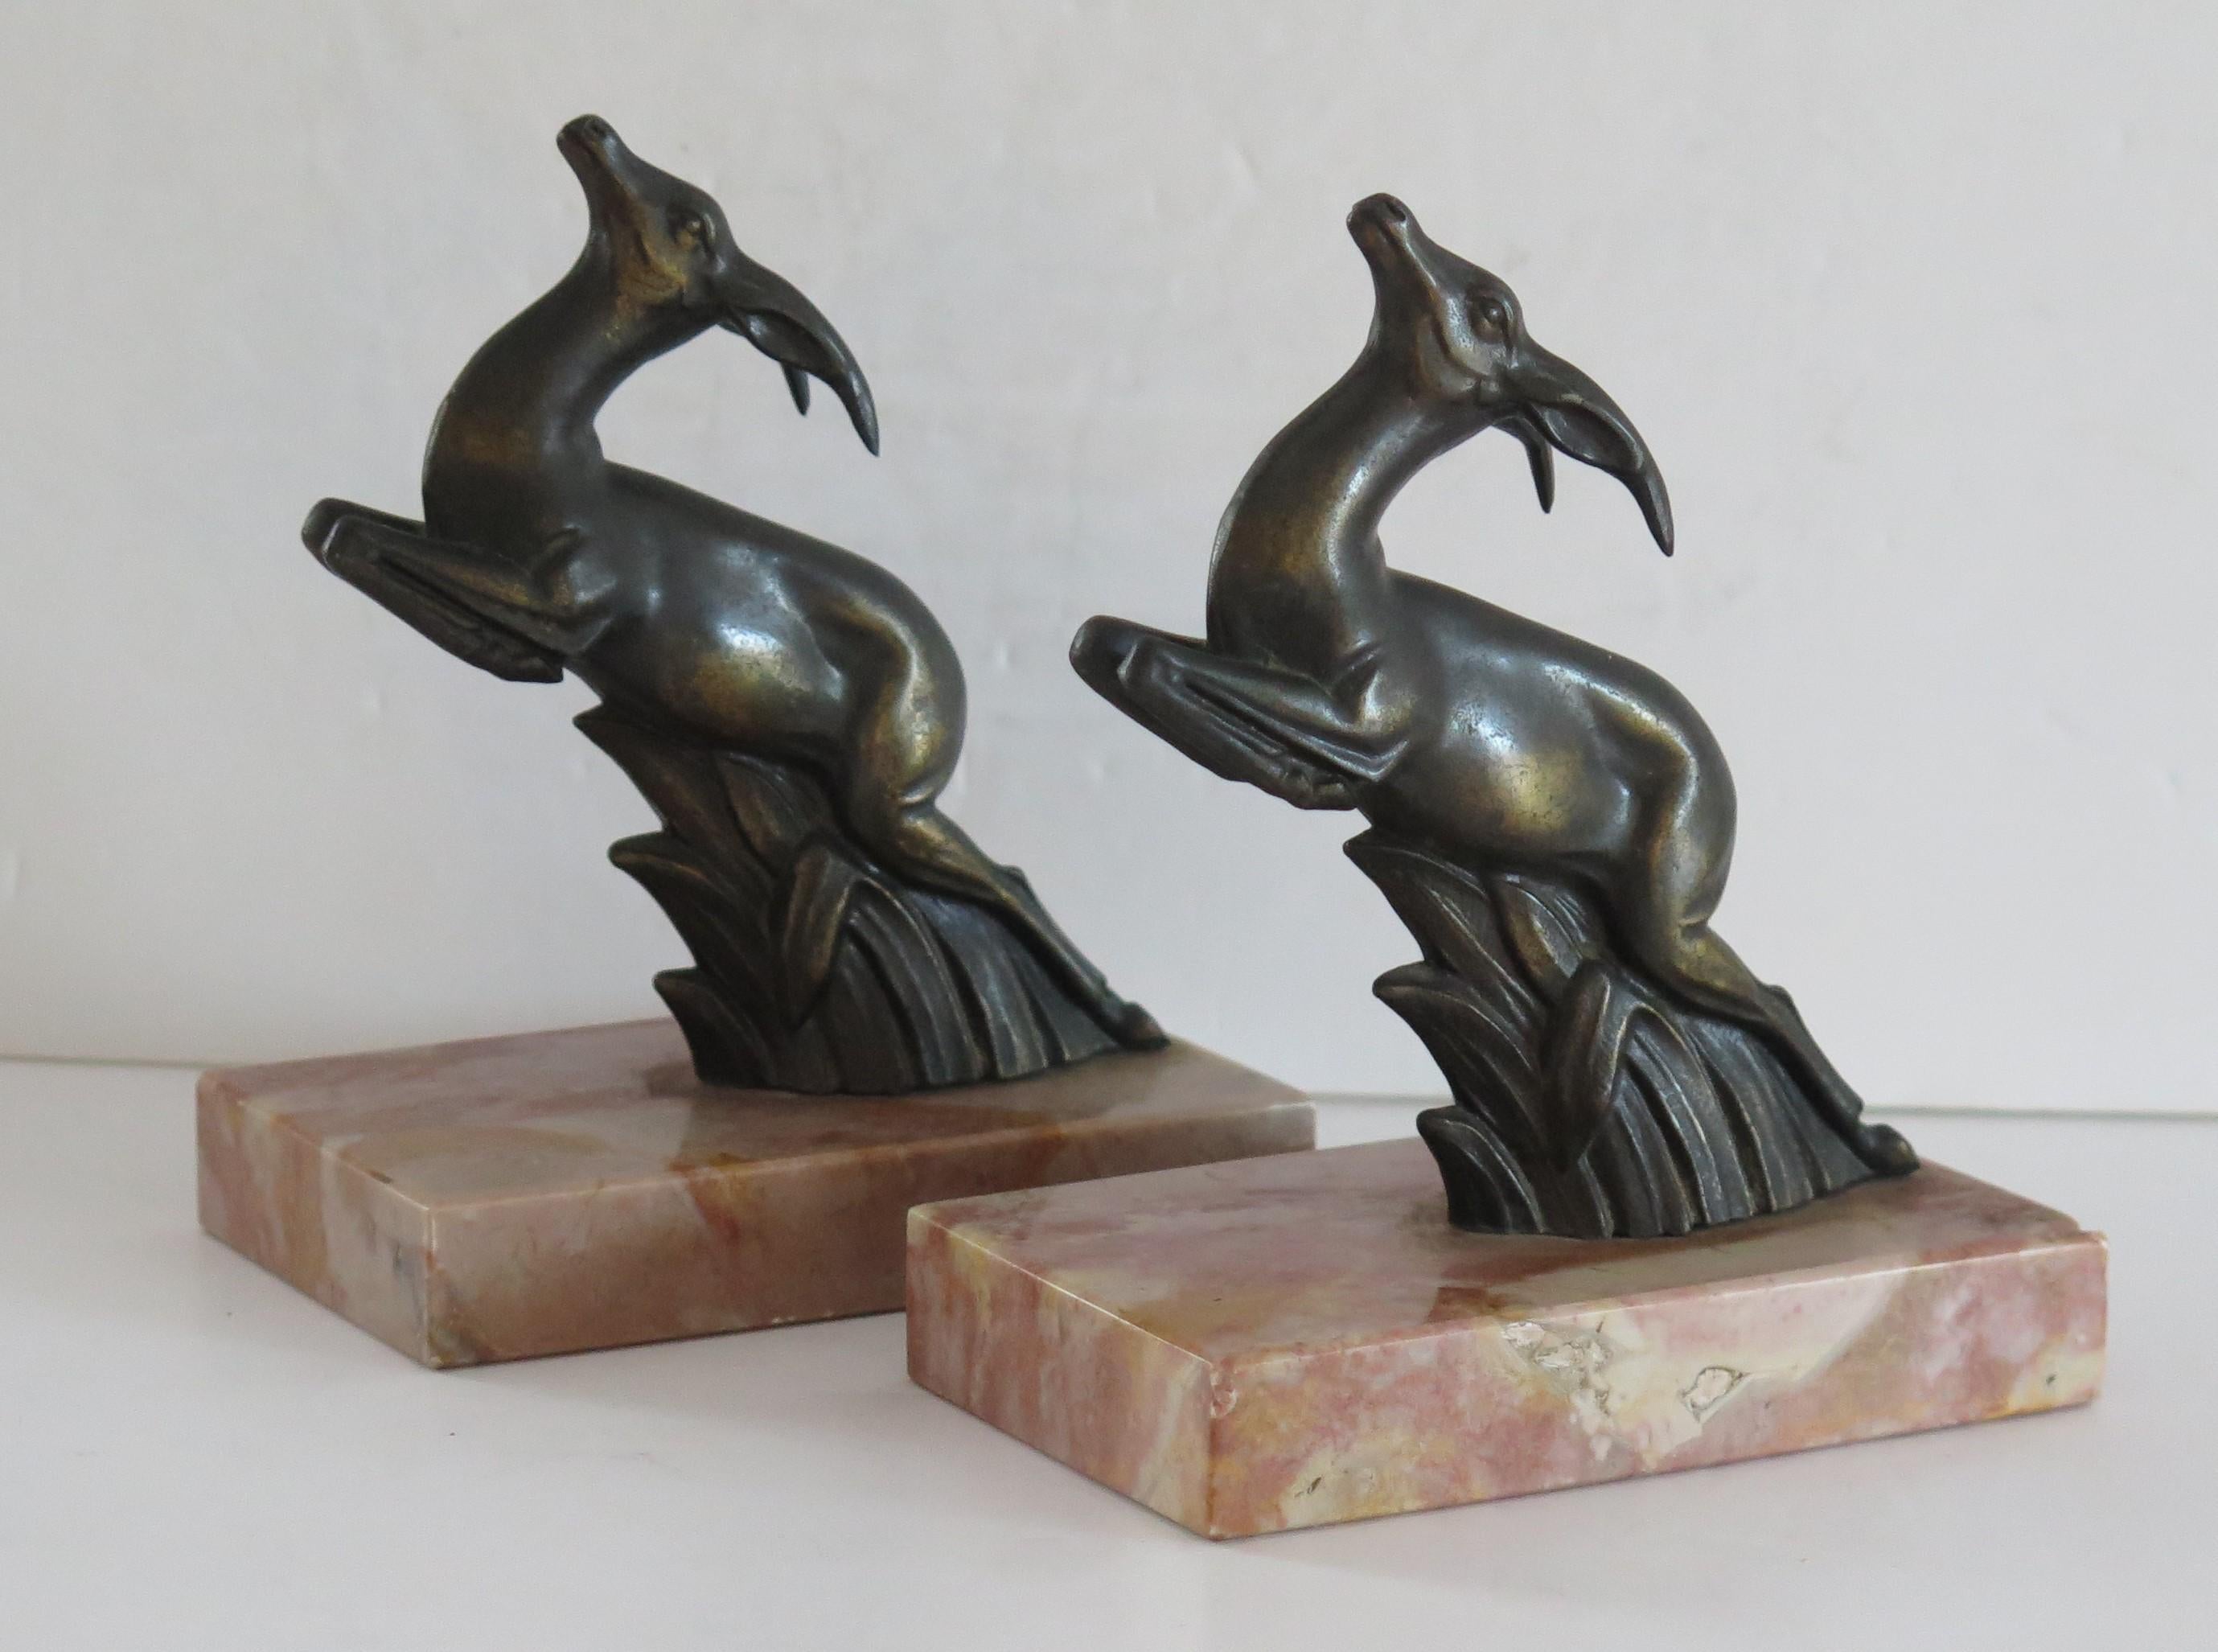 These are a beautiful pair of French, Art Deco period, Book Ends of two metal Springbok Antelopes, in a jumping pose all sat on Italian Marble bases. 

Each antelope has been well modelled with good detail. They are made of metal having a bronzed